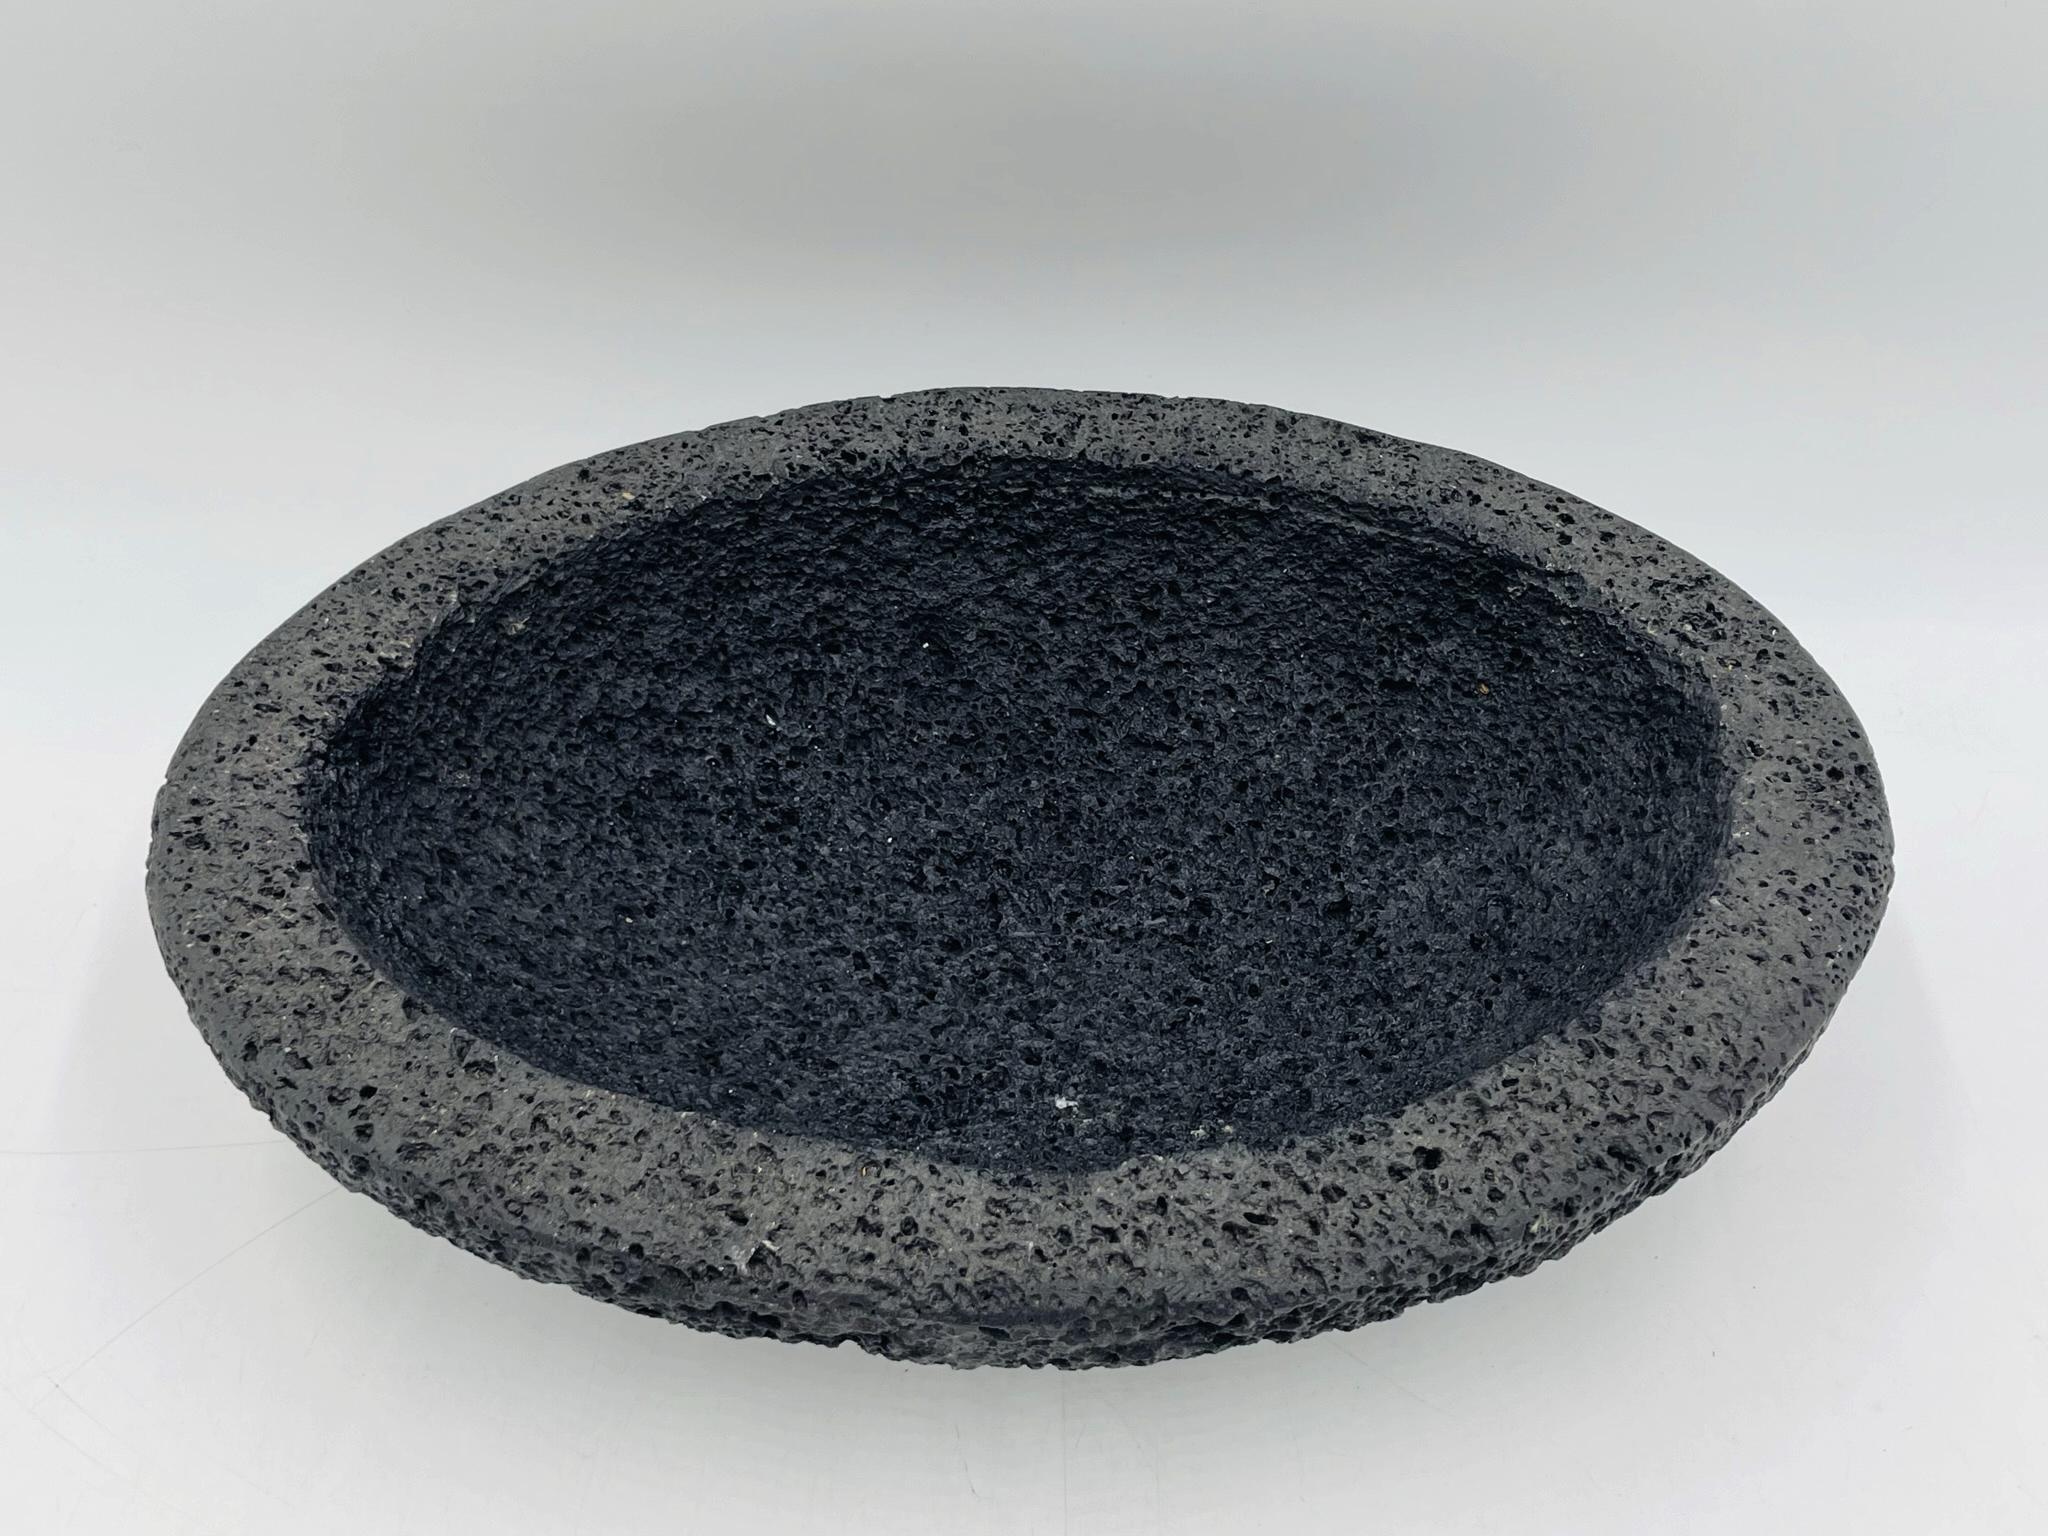 Silver Plate Silver-Plate Bowl with Bird Detail on Volcanic Rock baseby Emilia Castillo For Sale